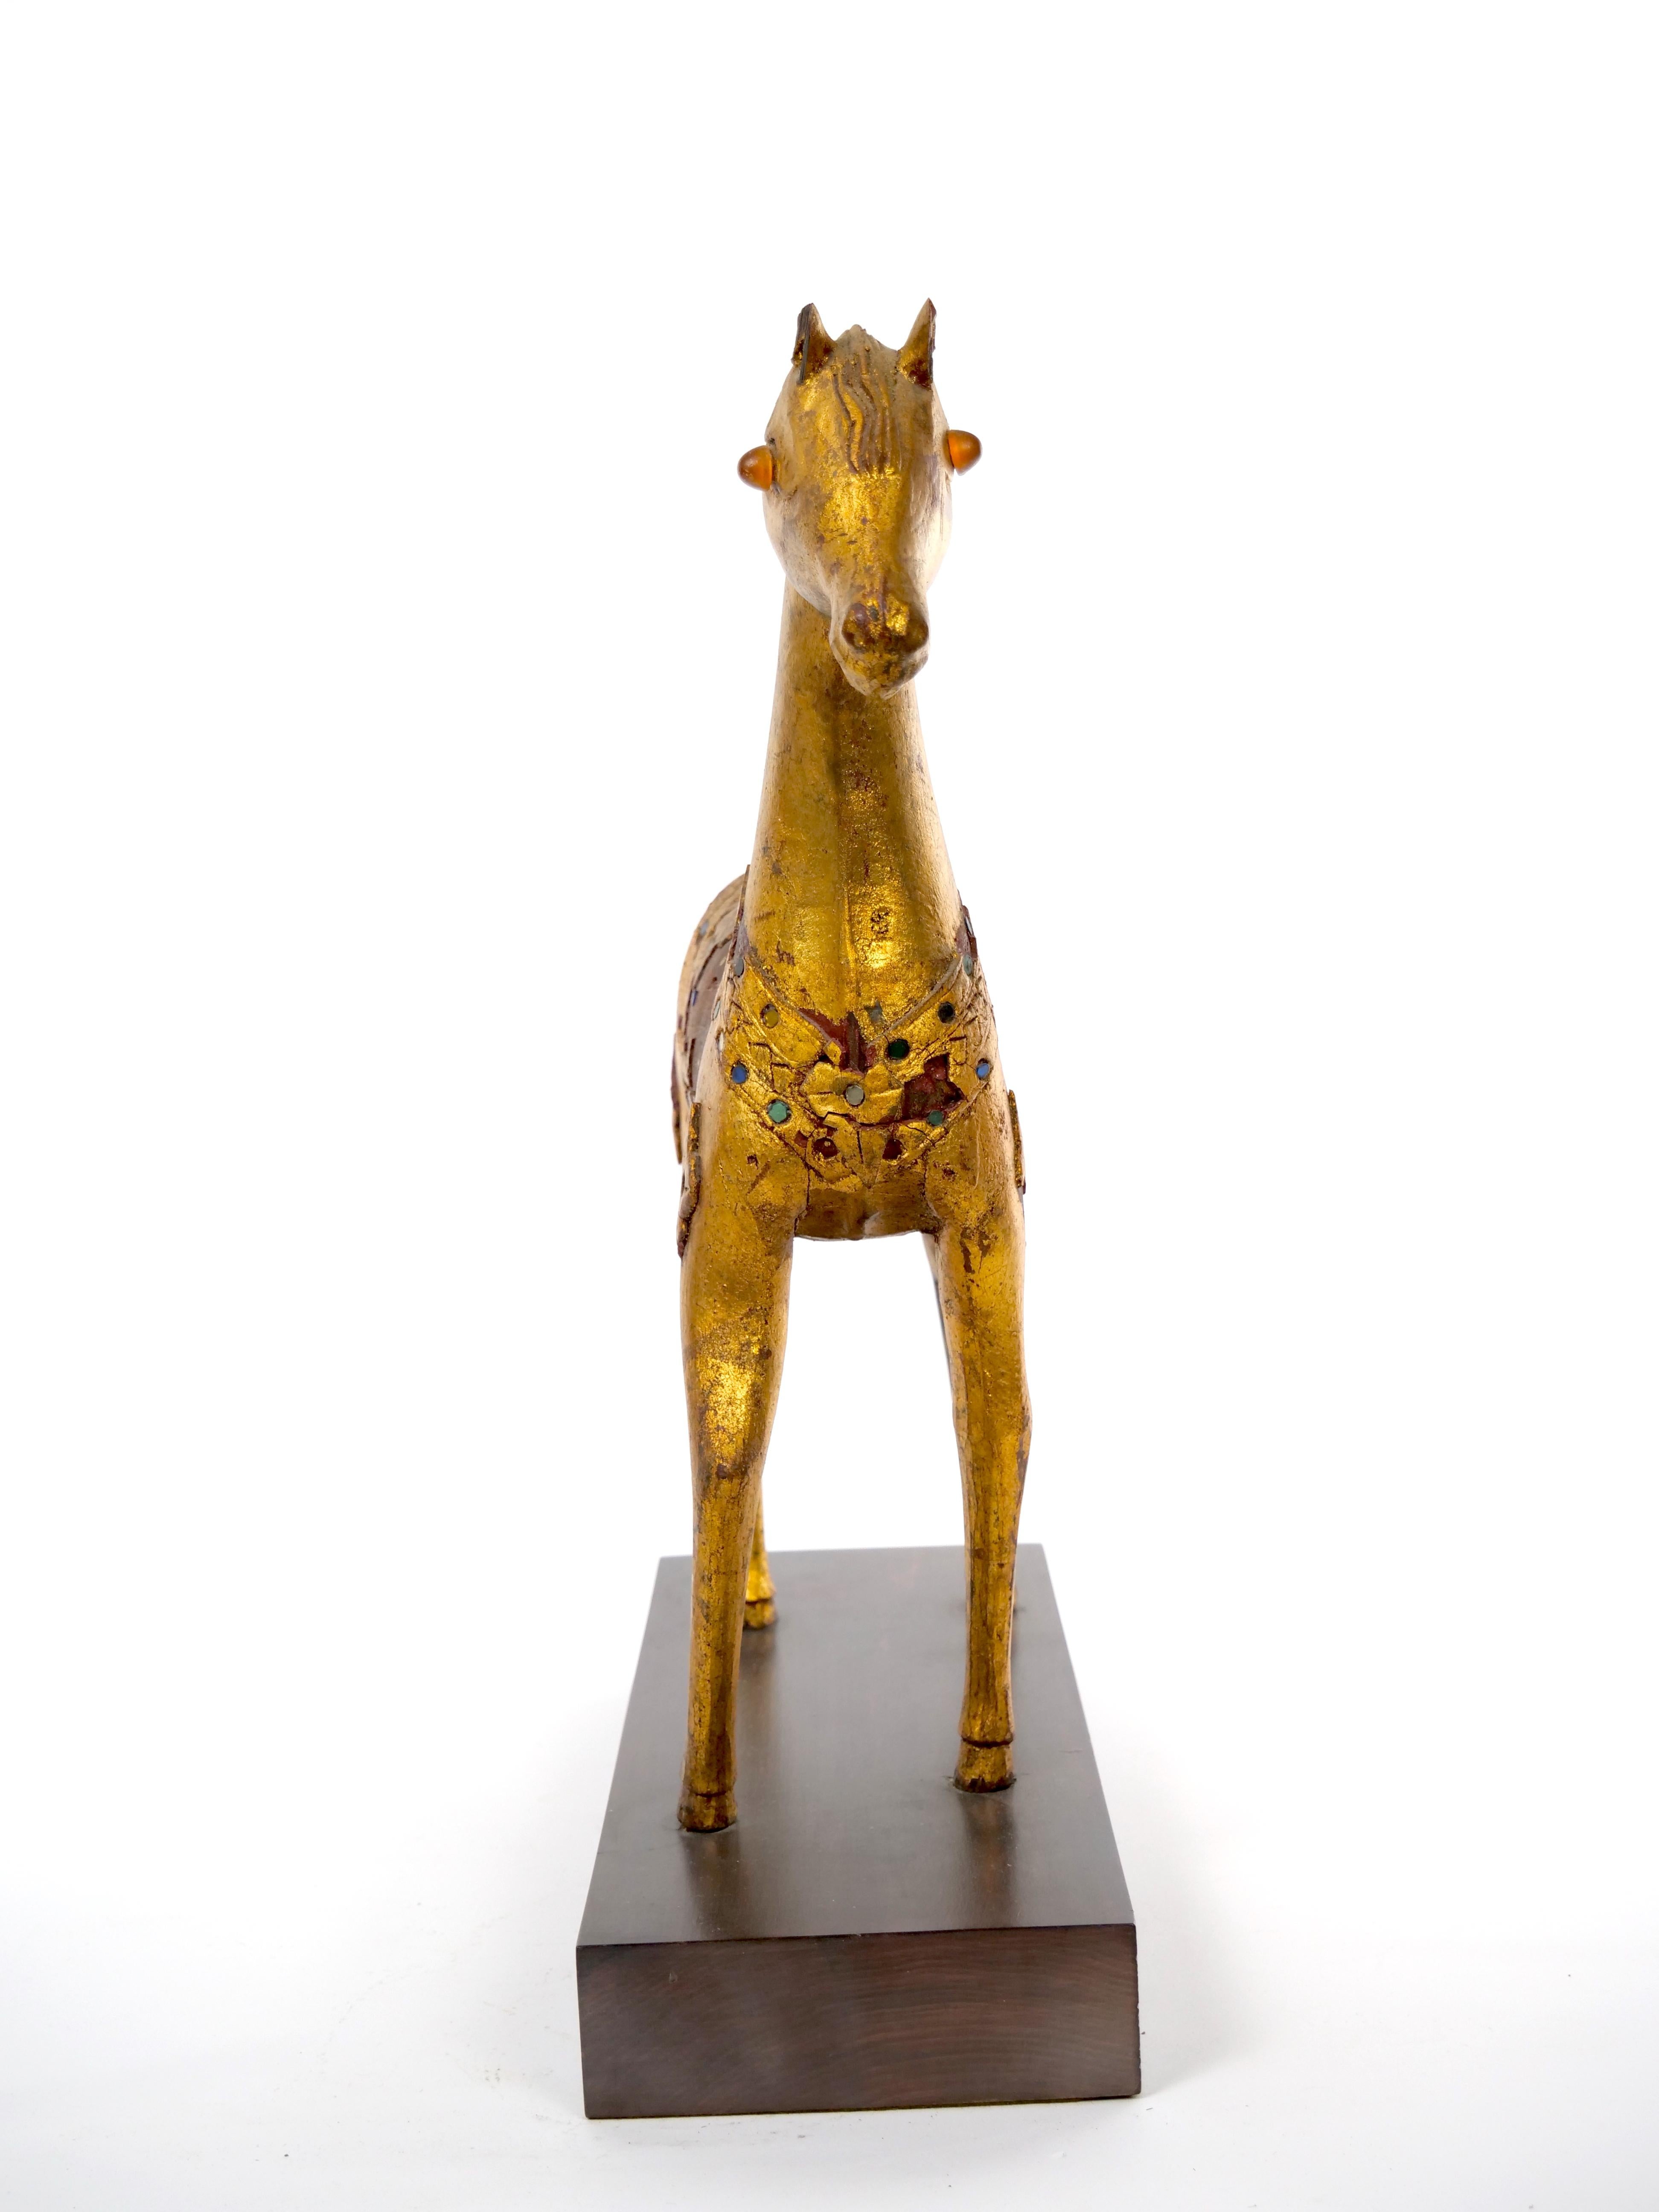 Large hand carved solid wood animal sculpture figurine with full gold leaf veneer. Intricate design and lovely patina. The decorative piece is in good condition with imperfections and minor losses to gilt consistent with age (see photos). It